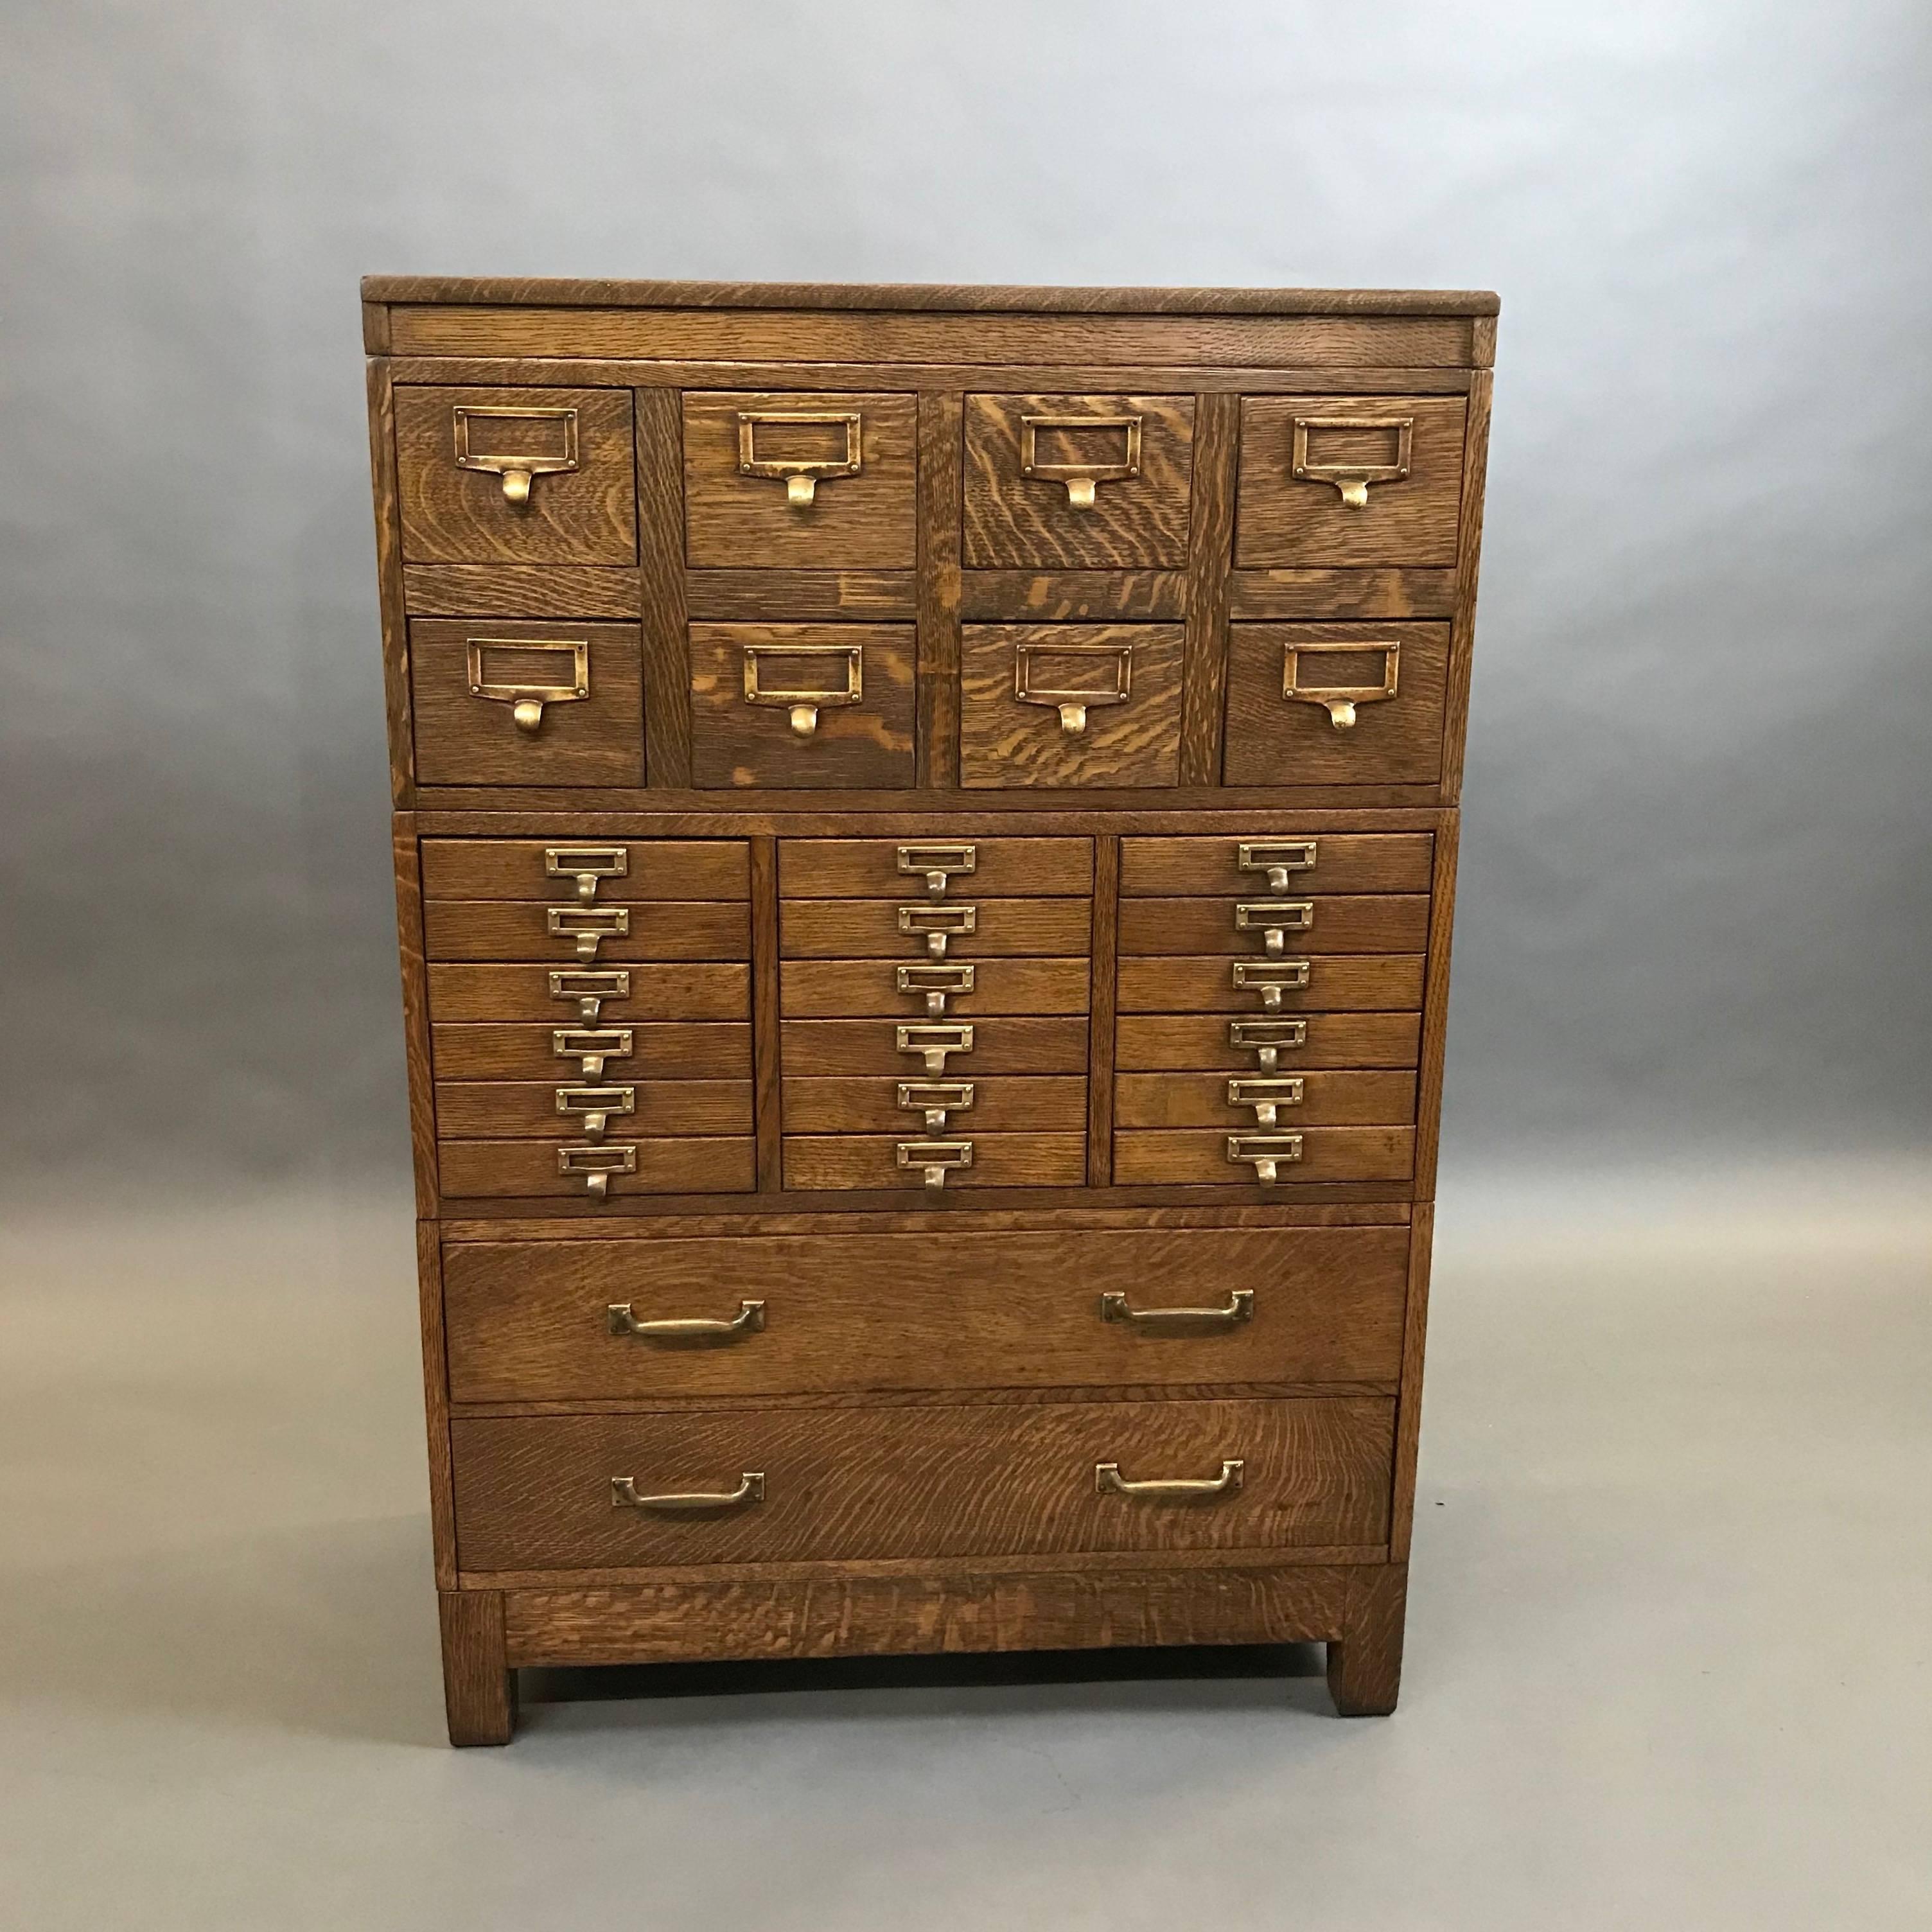 Outstanding, modular, tiger oak office cabinet by Globe Wernicke features 28 drawers in three sizes listed below with brass label frame pulls. The small drawers feature their original green painted interior. The sides have a wonderful panel detail.